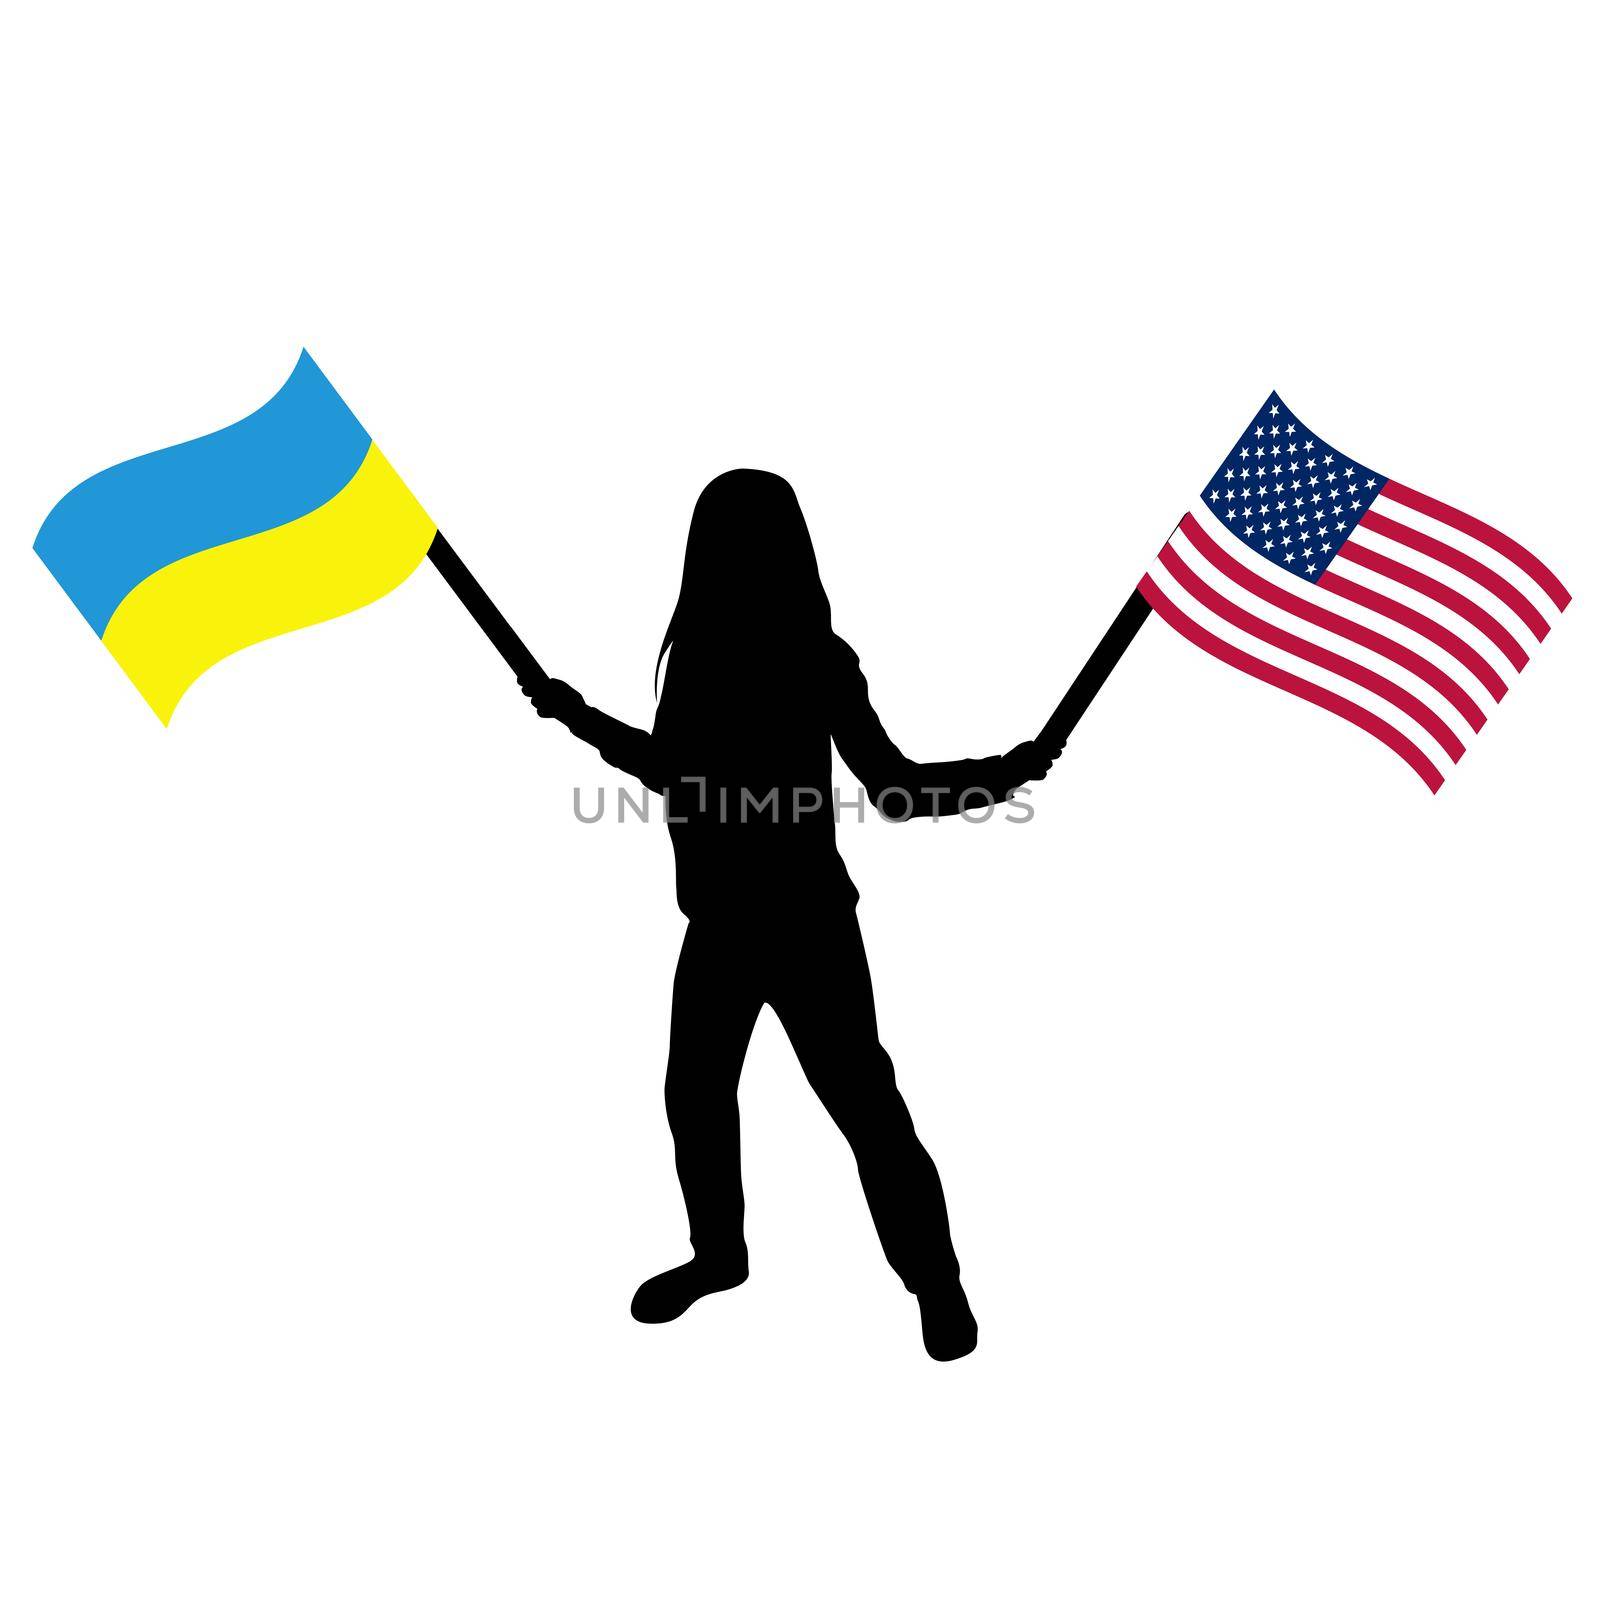 Ukraine and USA concept with girl holding the Ukraine and USA flags